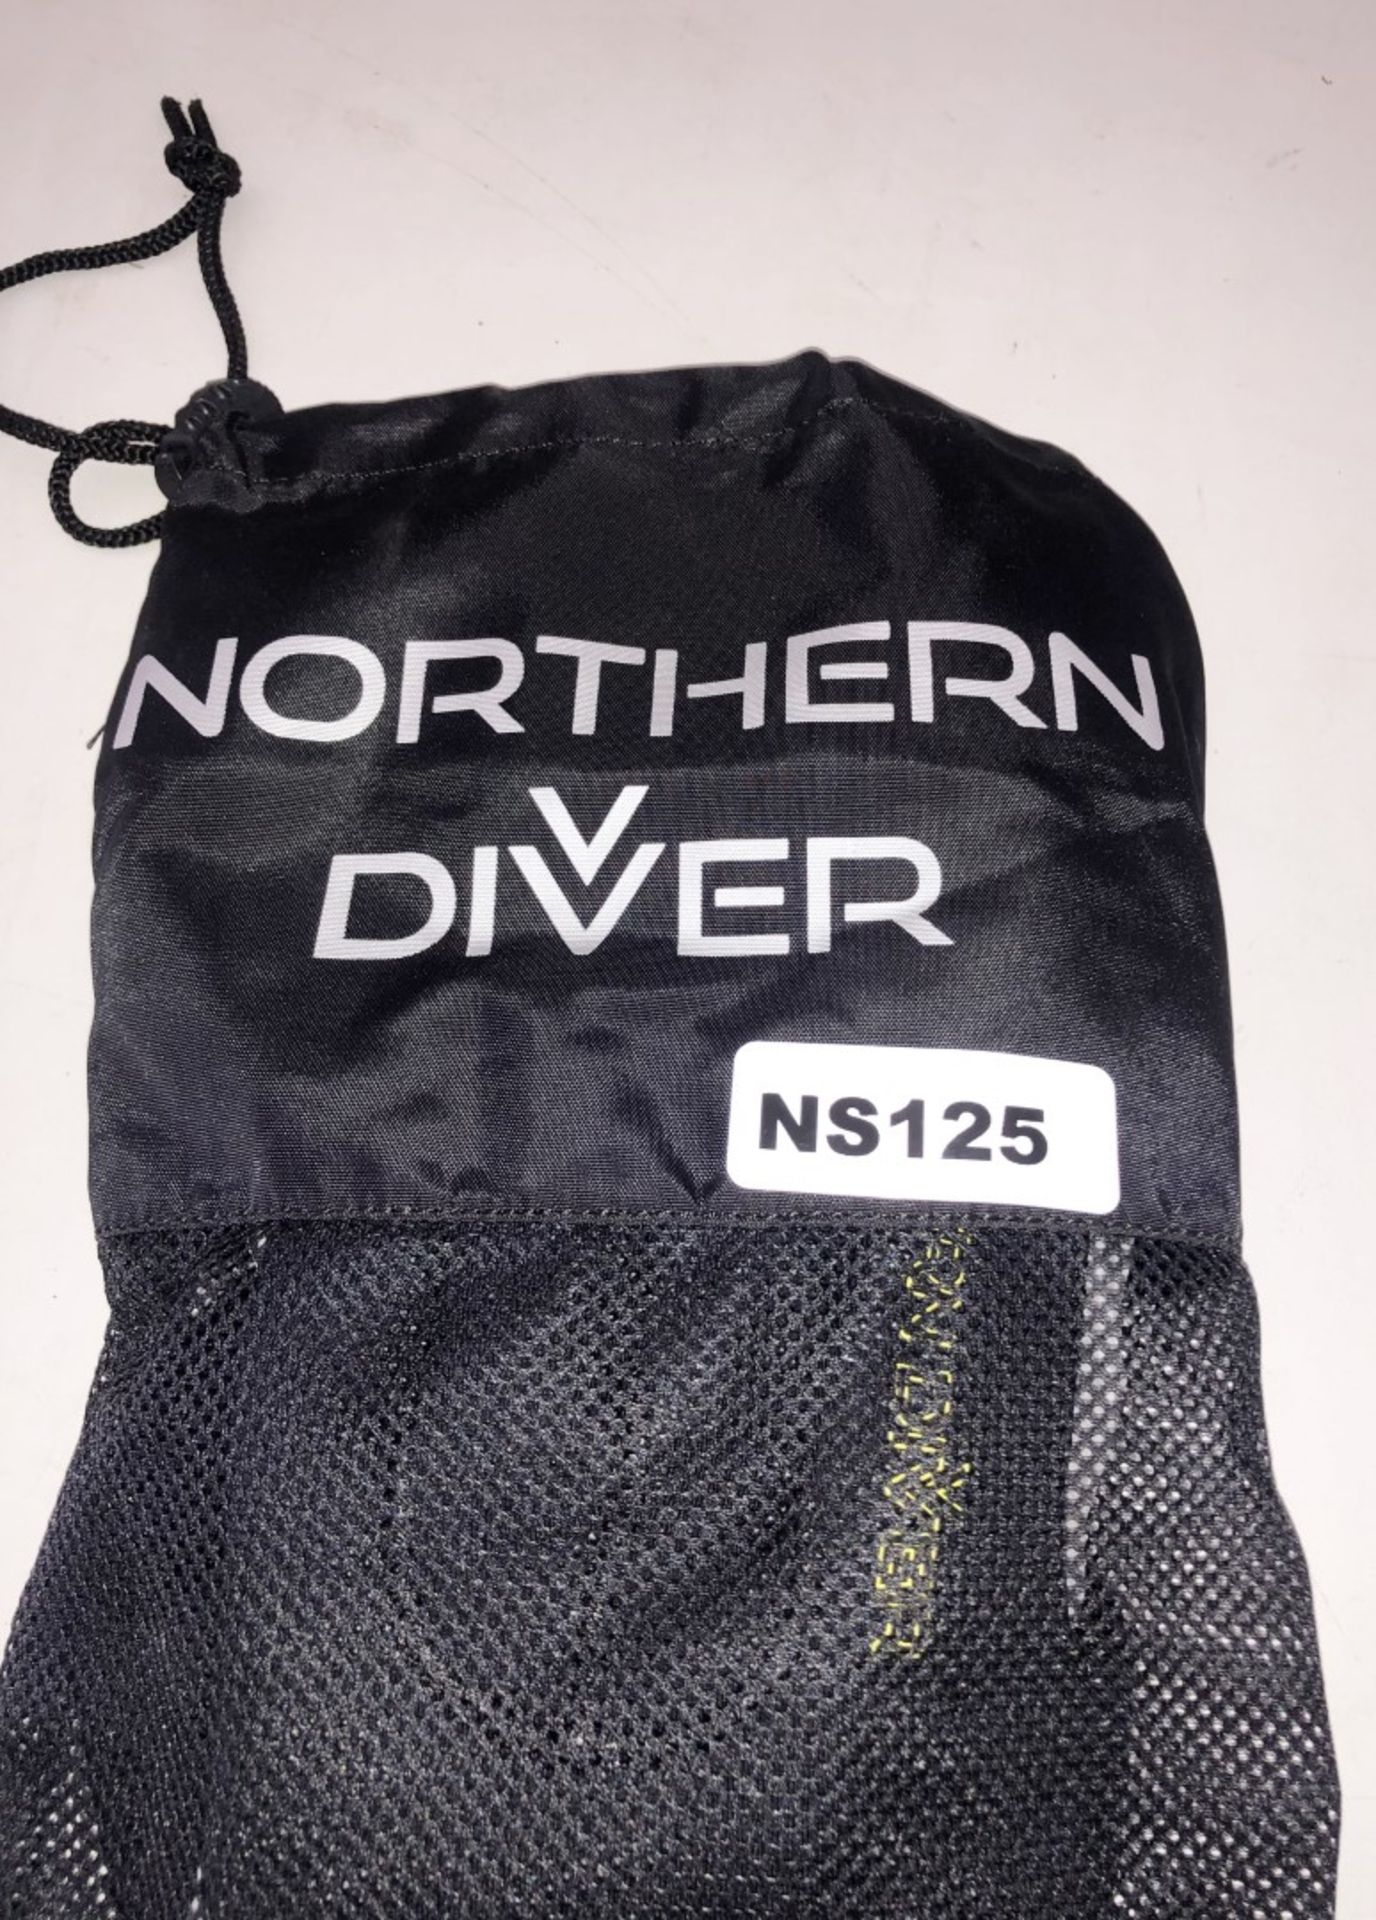 6 Pairs Of New Scuba Gloves - CL349 - Altrincham WA14 - Image 22 of 25